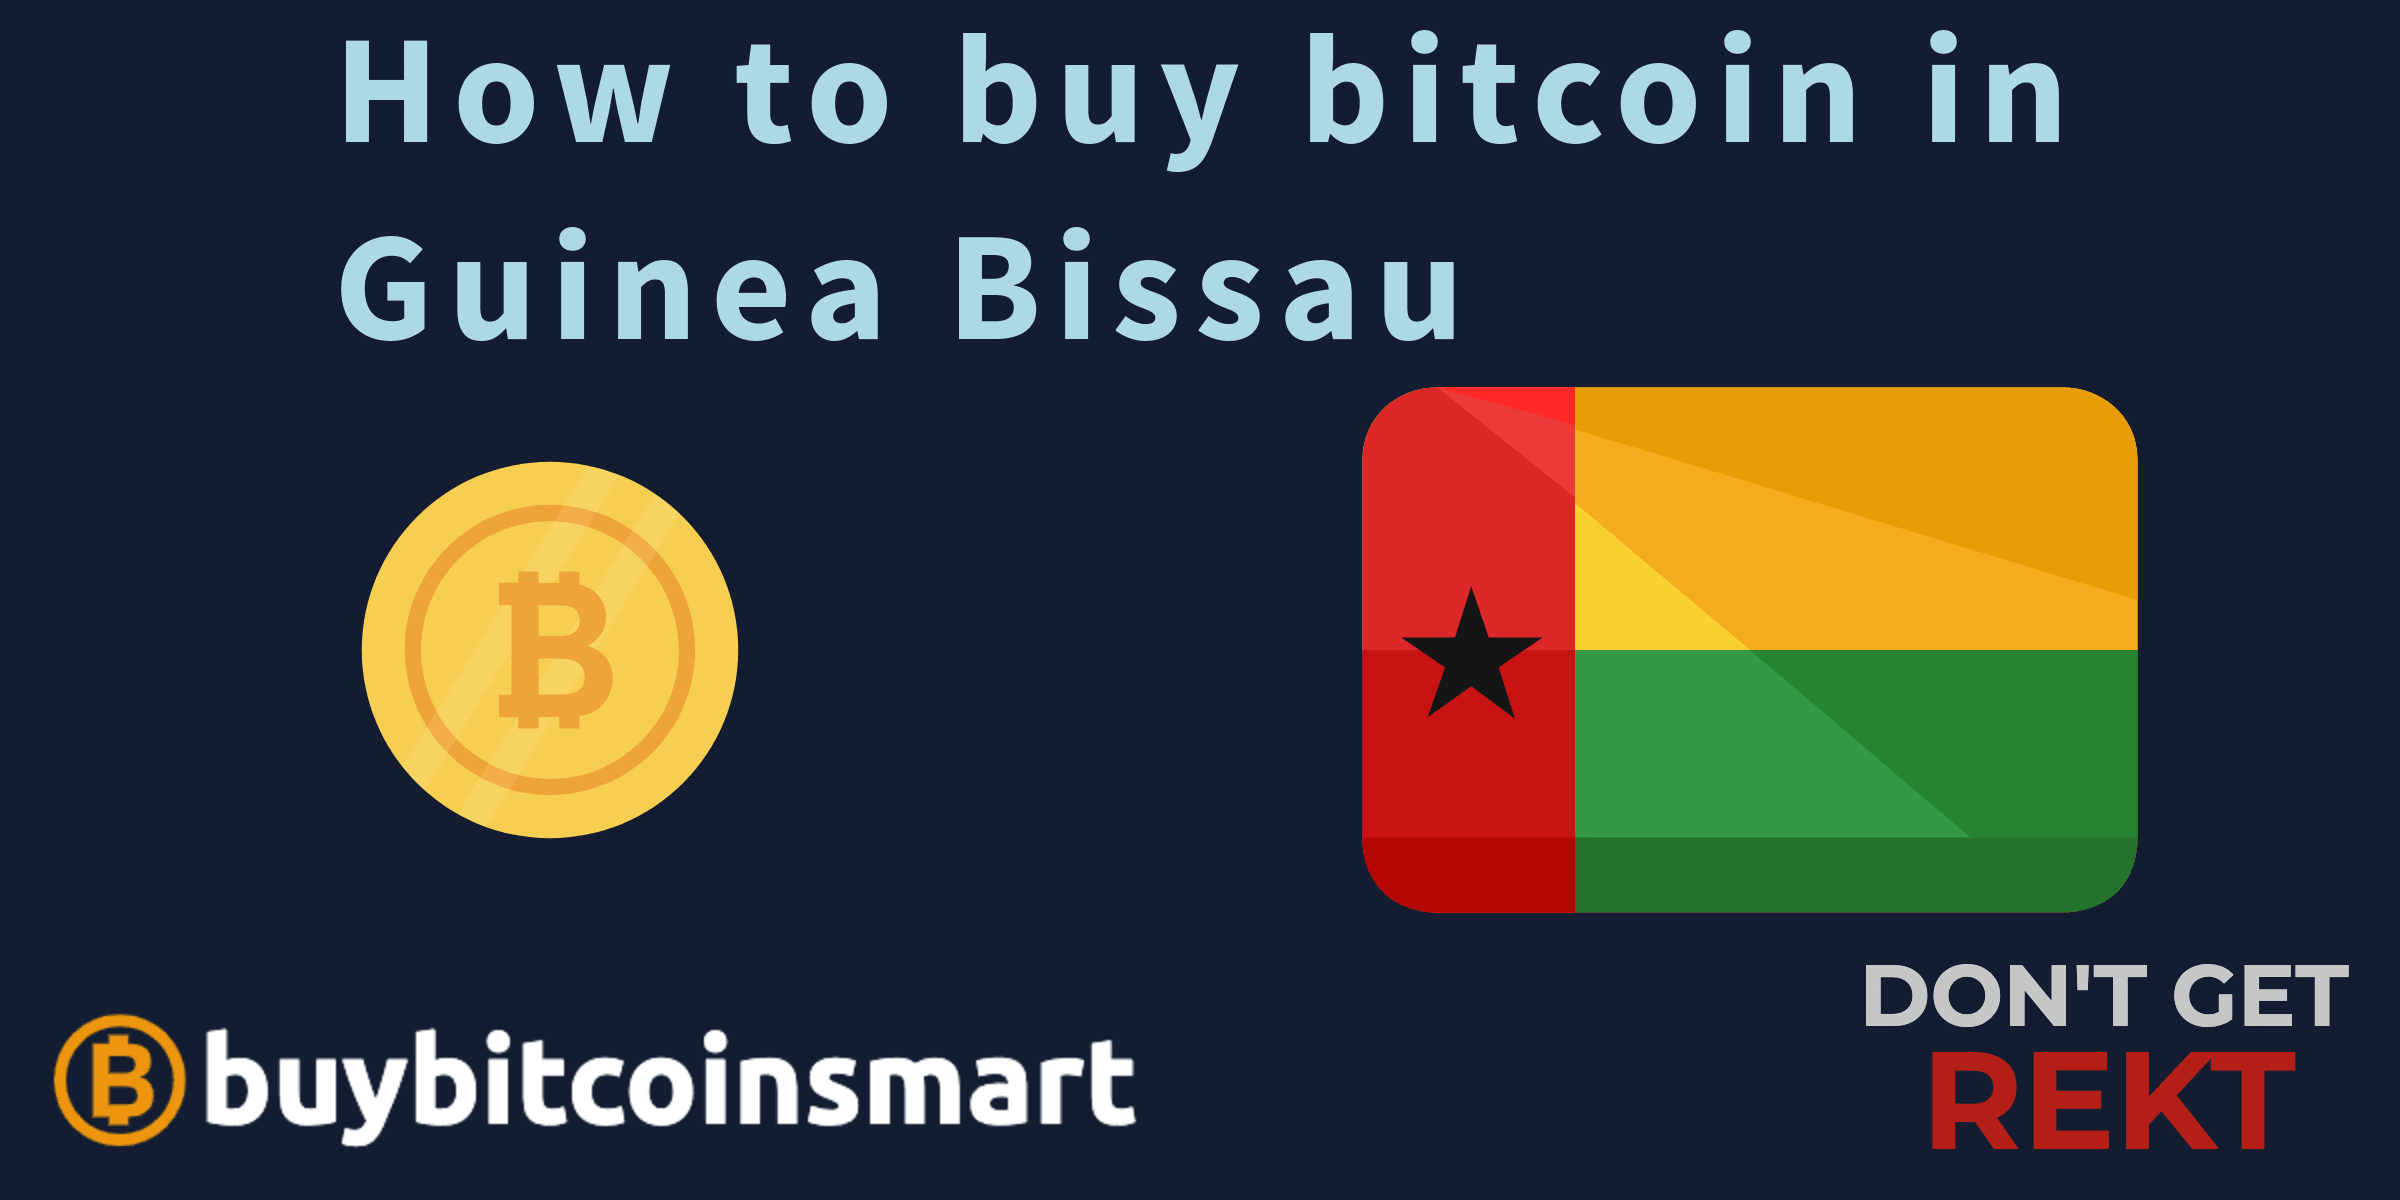 How to buy bitcoin in Guinea Bissau